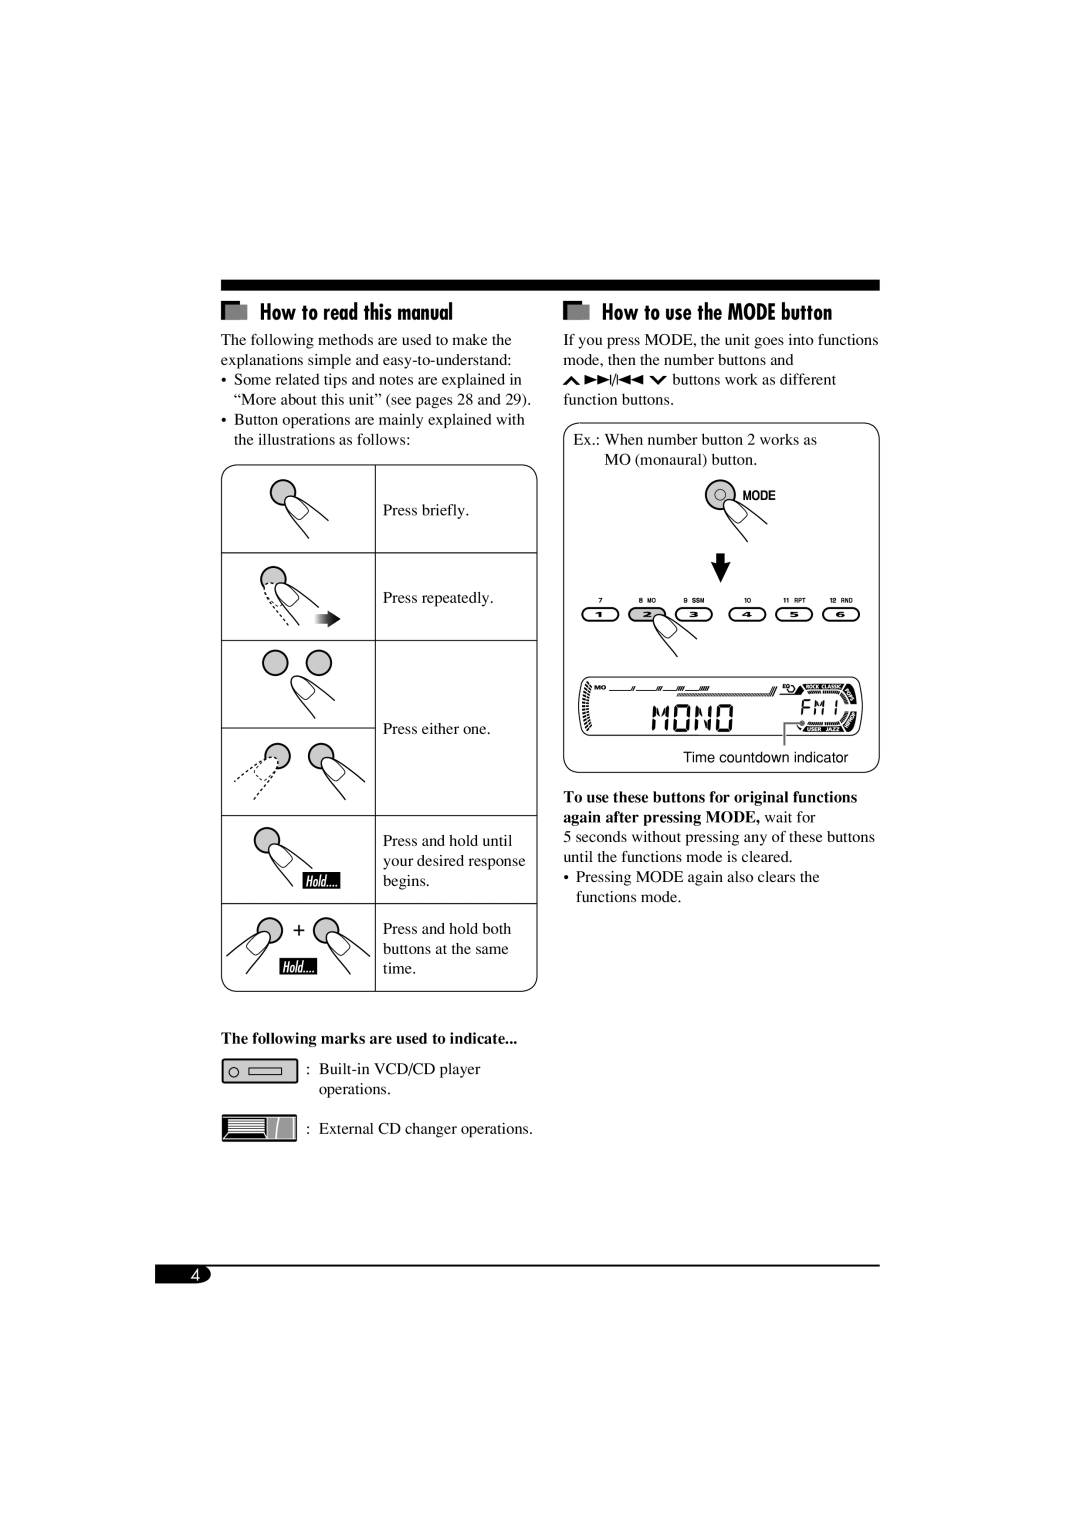 JVC KD-SV3104 How to read this manual, How to use the MODE button, The following marks are used to indicate 